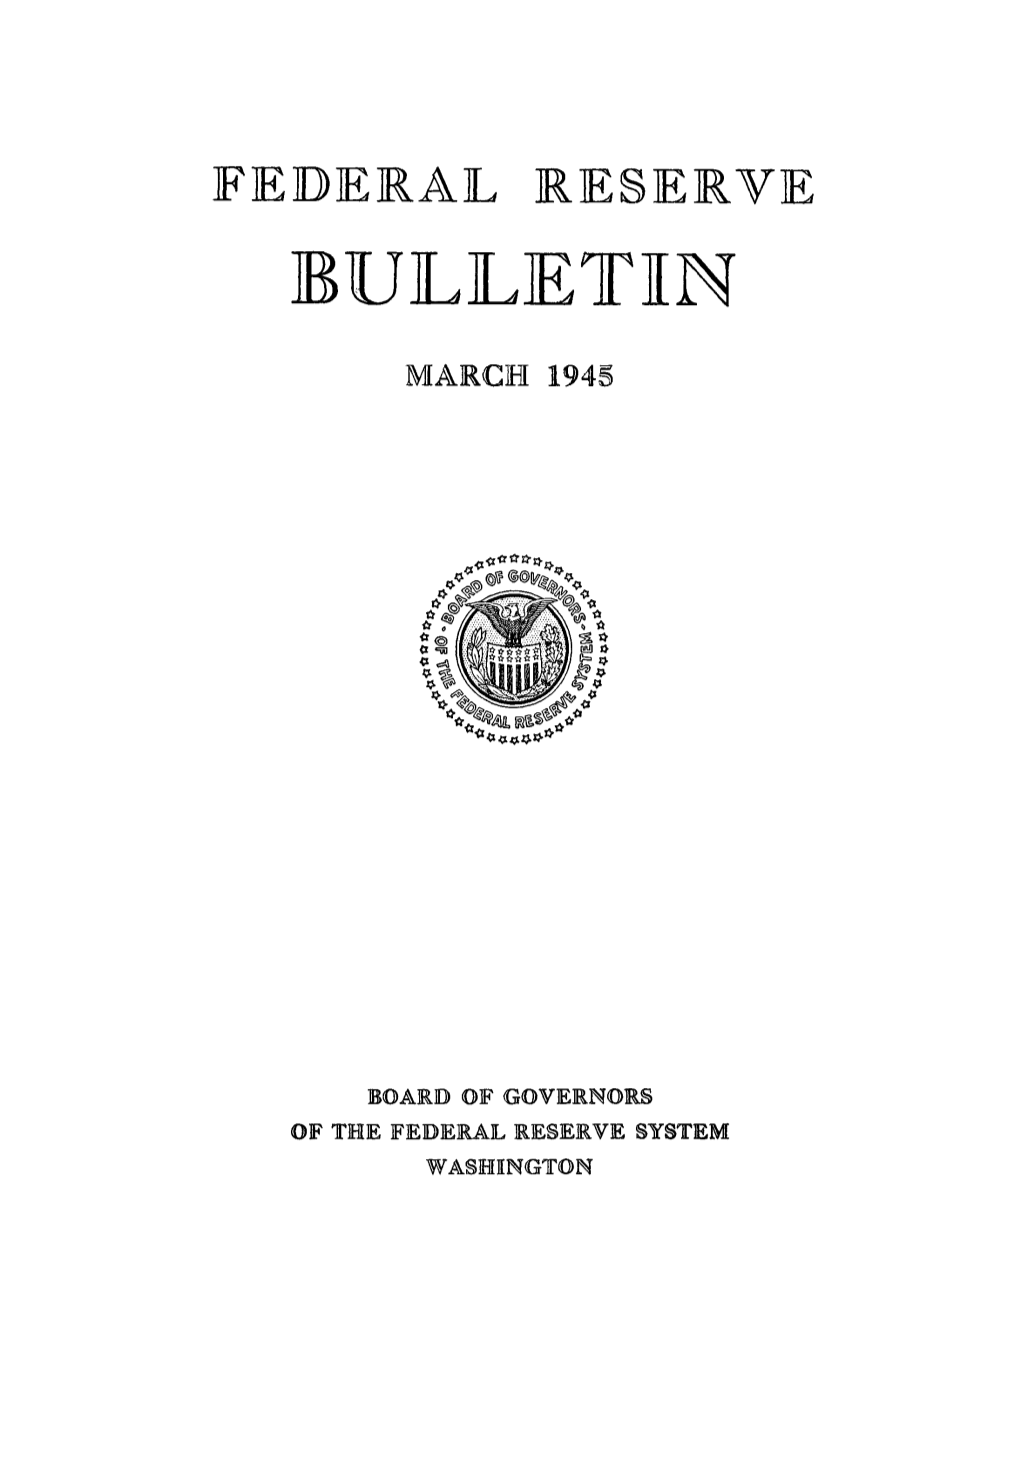 Federal Reserve Bulletin March 1945